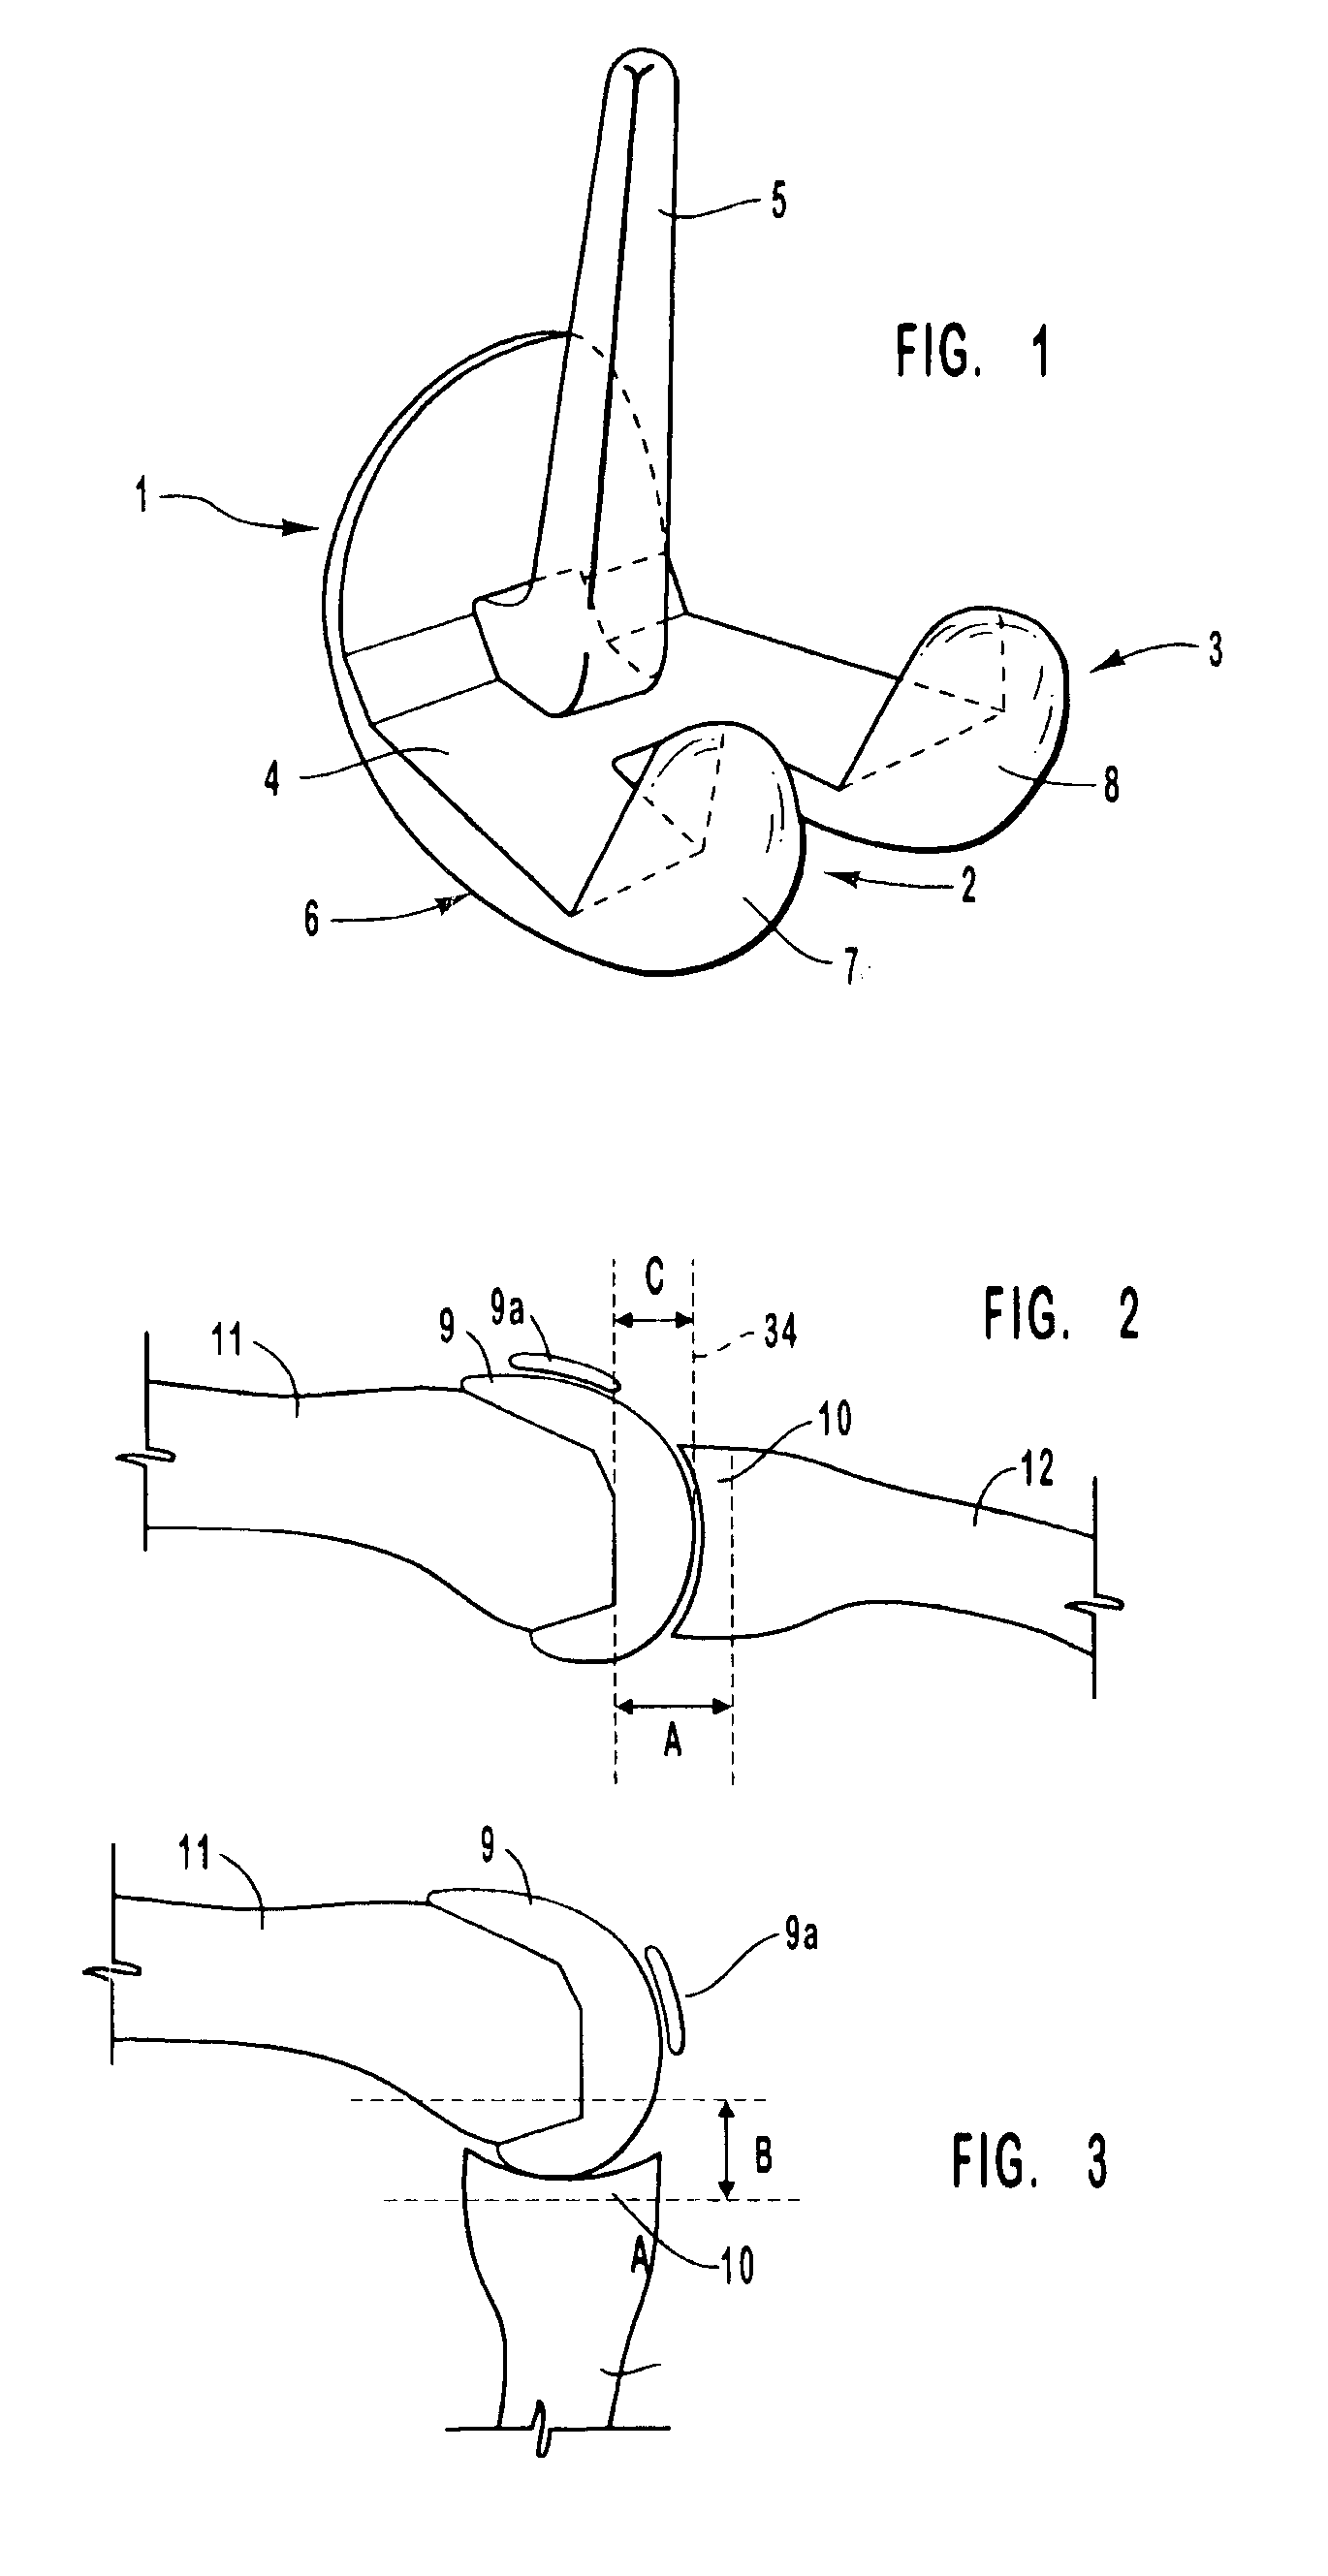 Method for resecting the knee using a resection guide and provisional prosthetic component